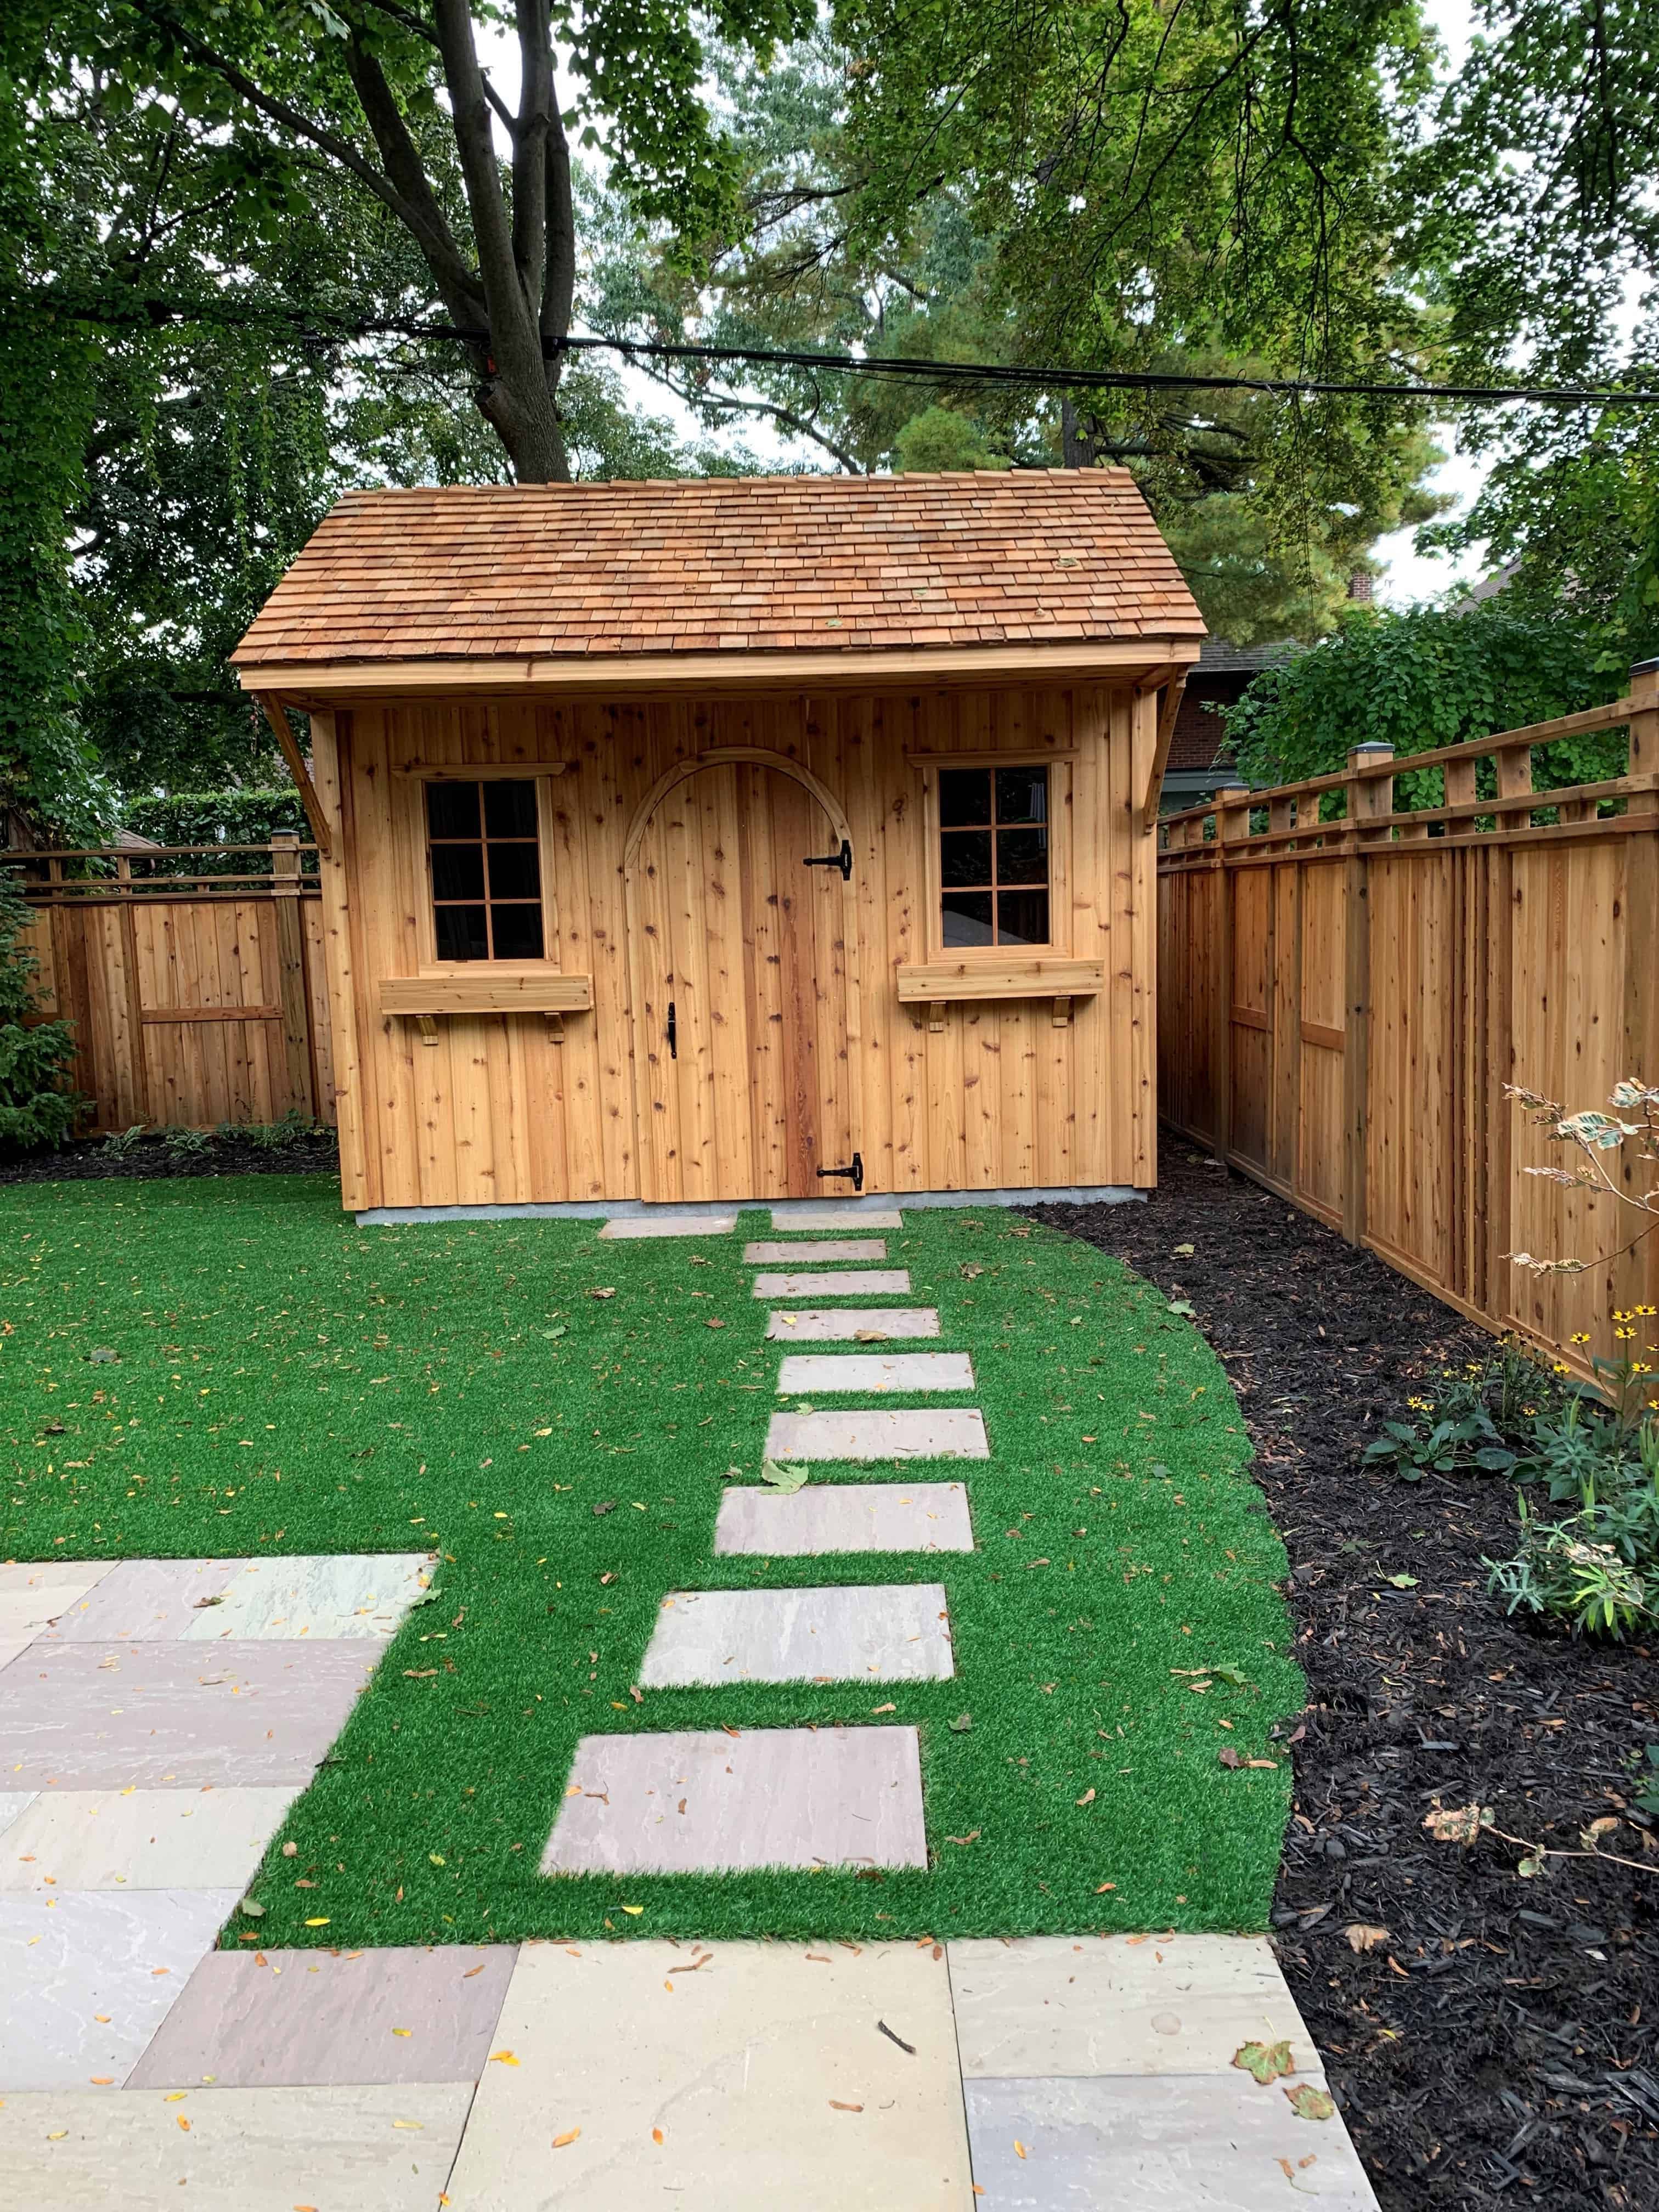 Front view of 8’ x 12' Glen Echo Garden Shed located in Etobicoke, Ontario – Summerwood Products